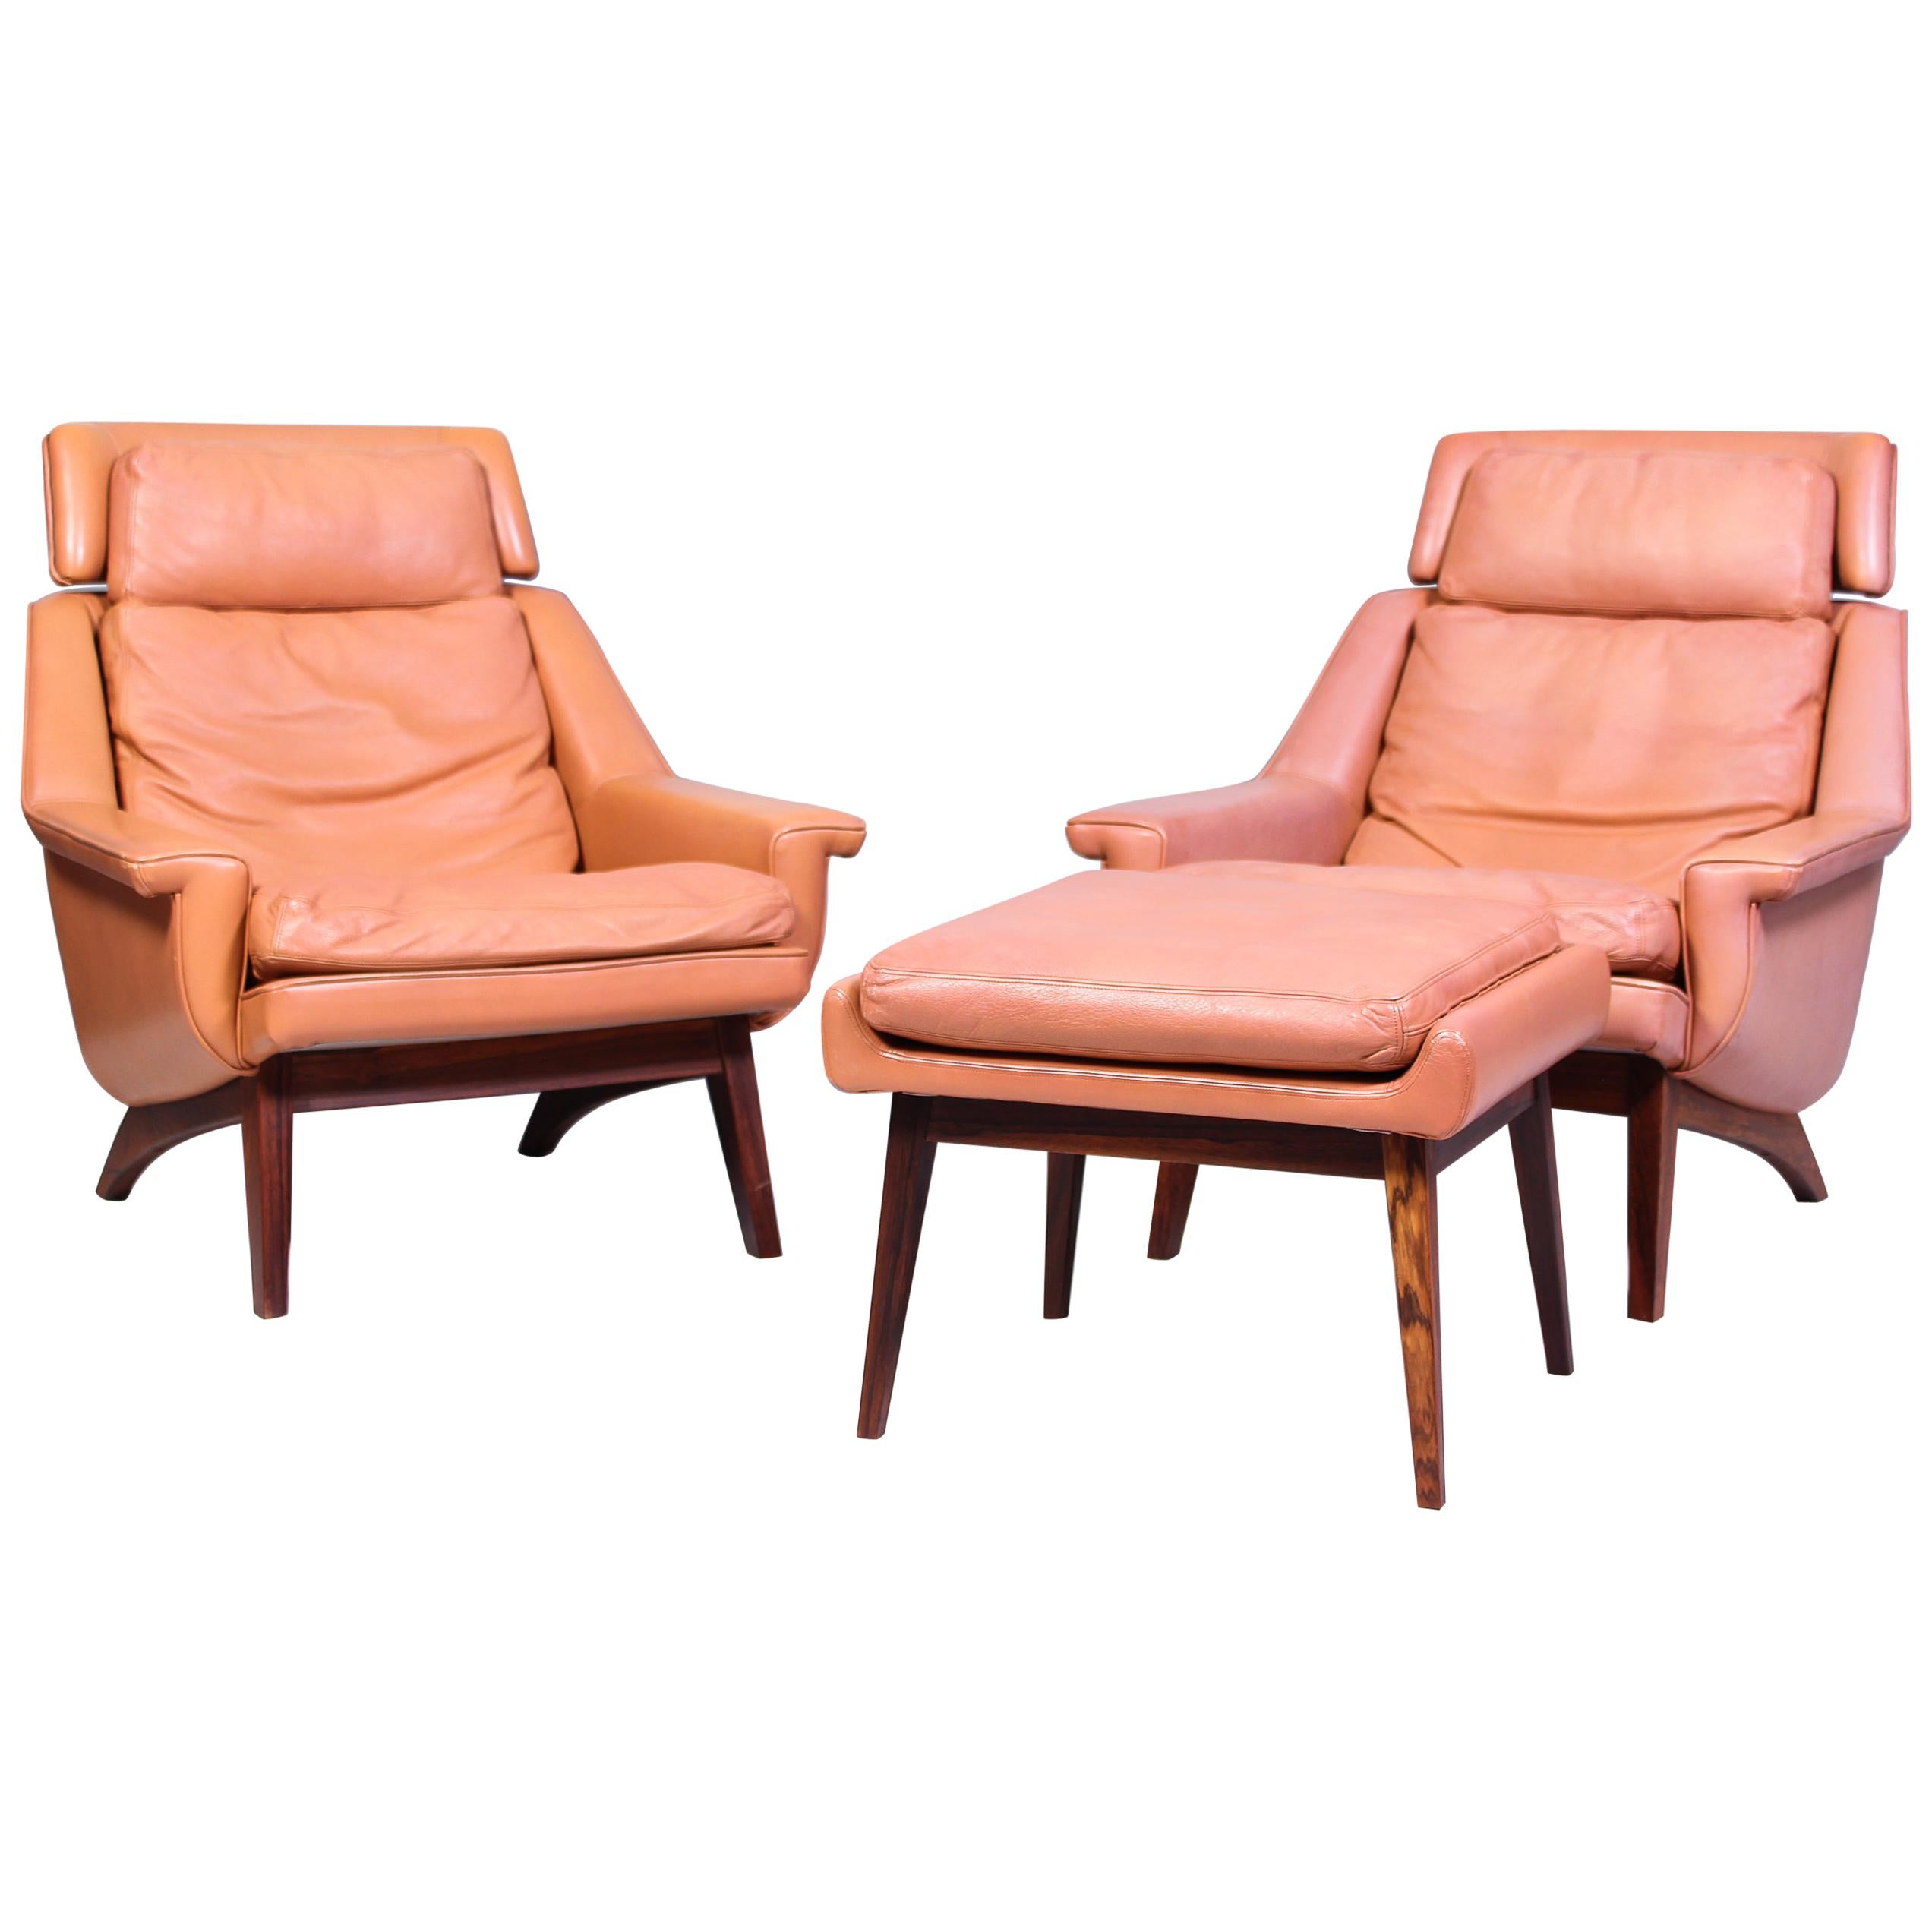 Leather & Rosewood Lounge Chairs and Ottoman by Werner Langenfled, Denmark 1960s For Sale